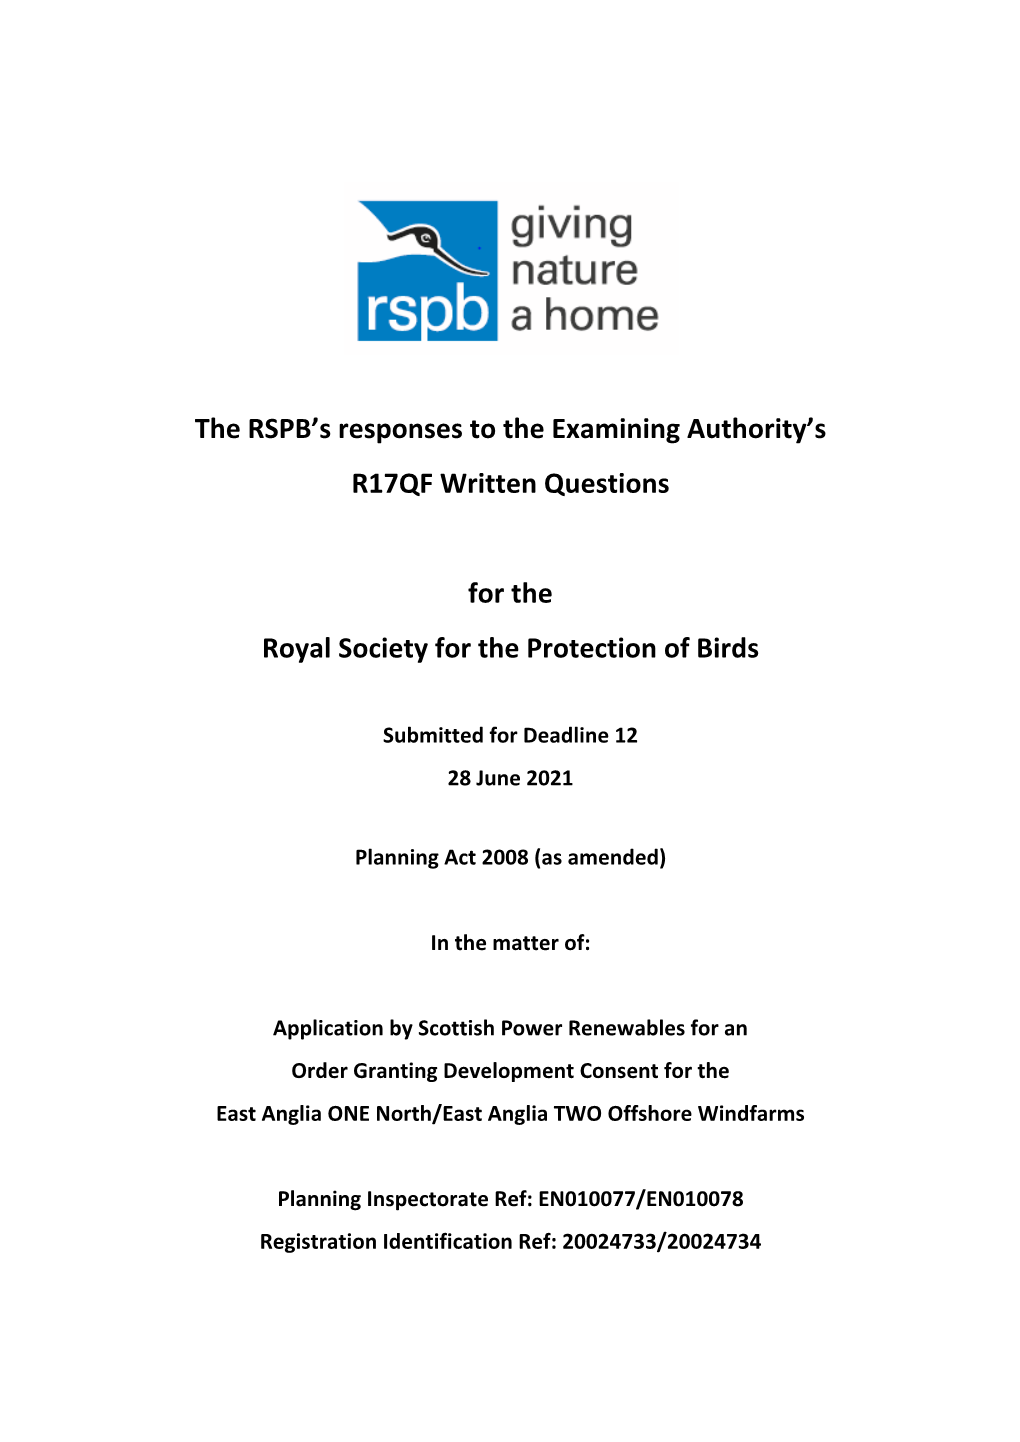 The RSPB's Responses to the Examining Authority's R17QF